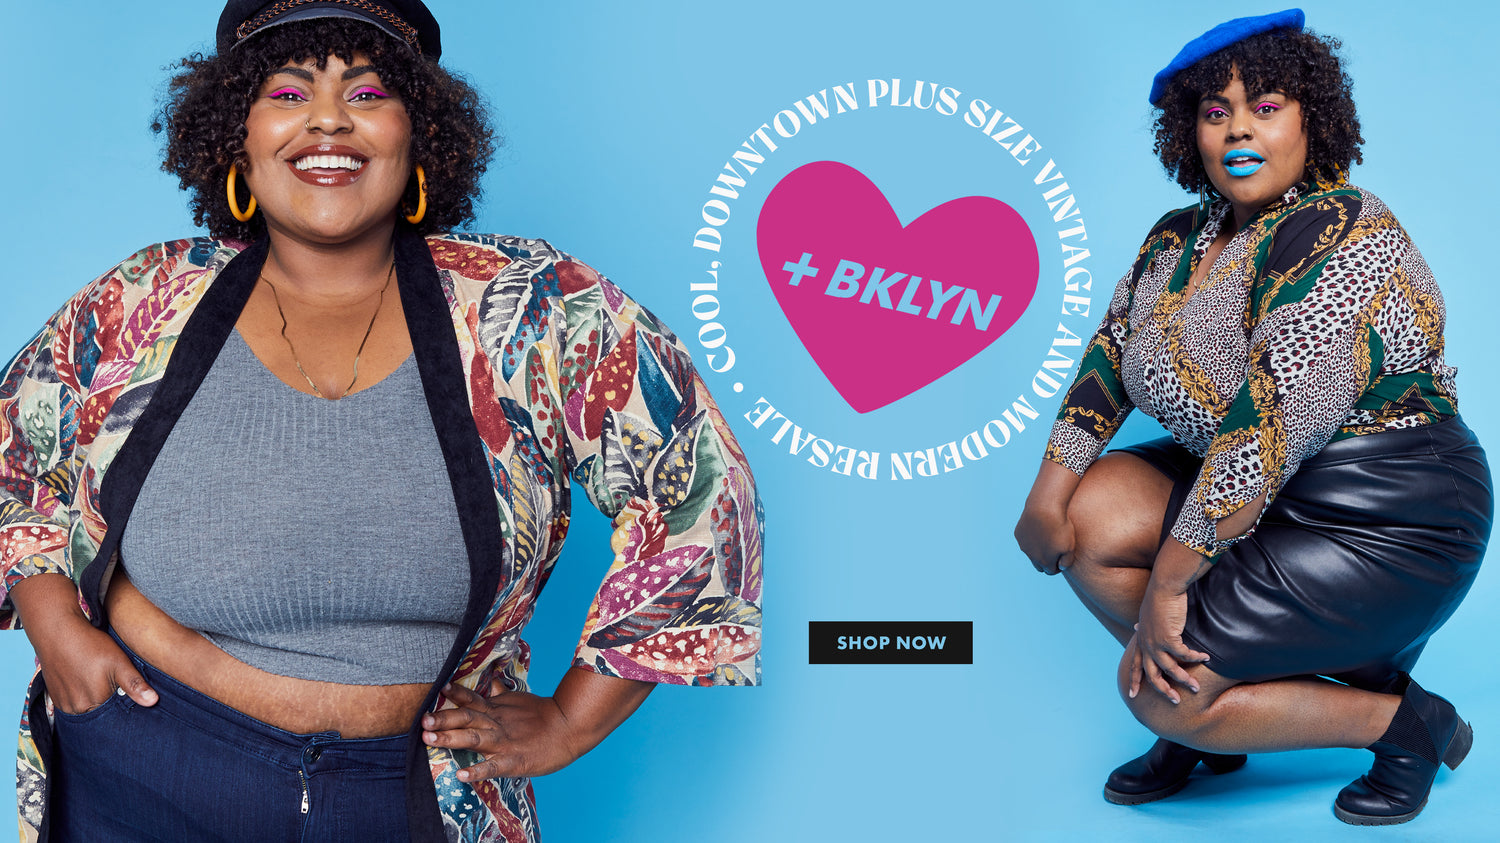 Cool downtown clothes for fat folks, sizes Large and up – Plus BKLYN